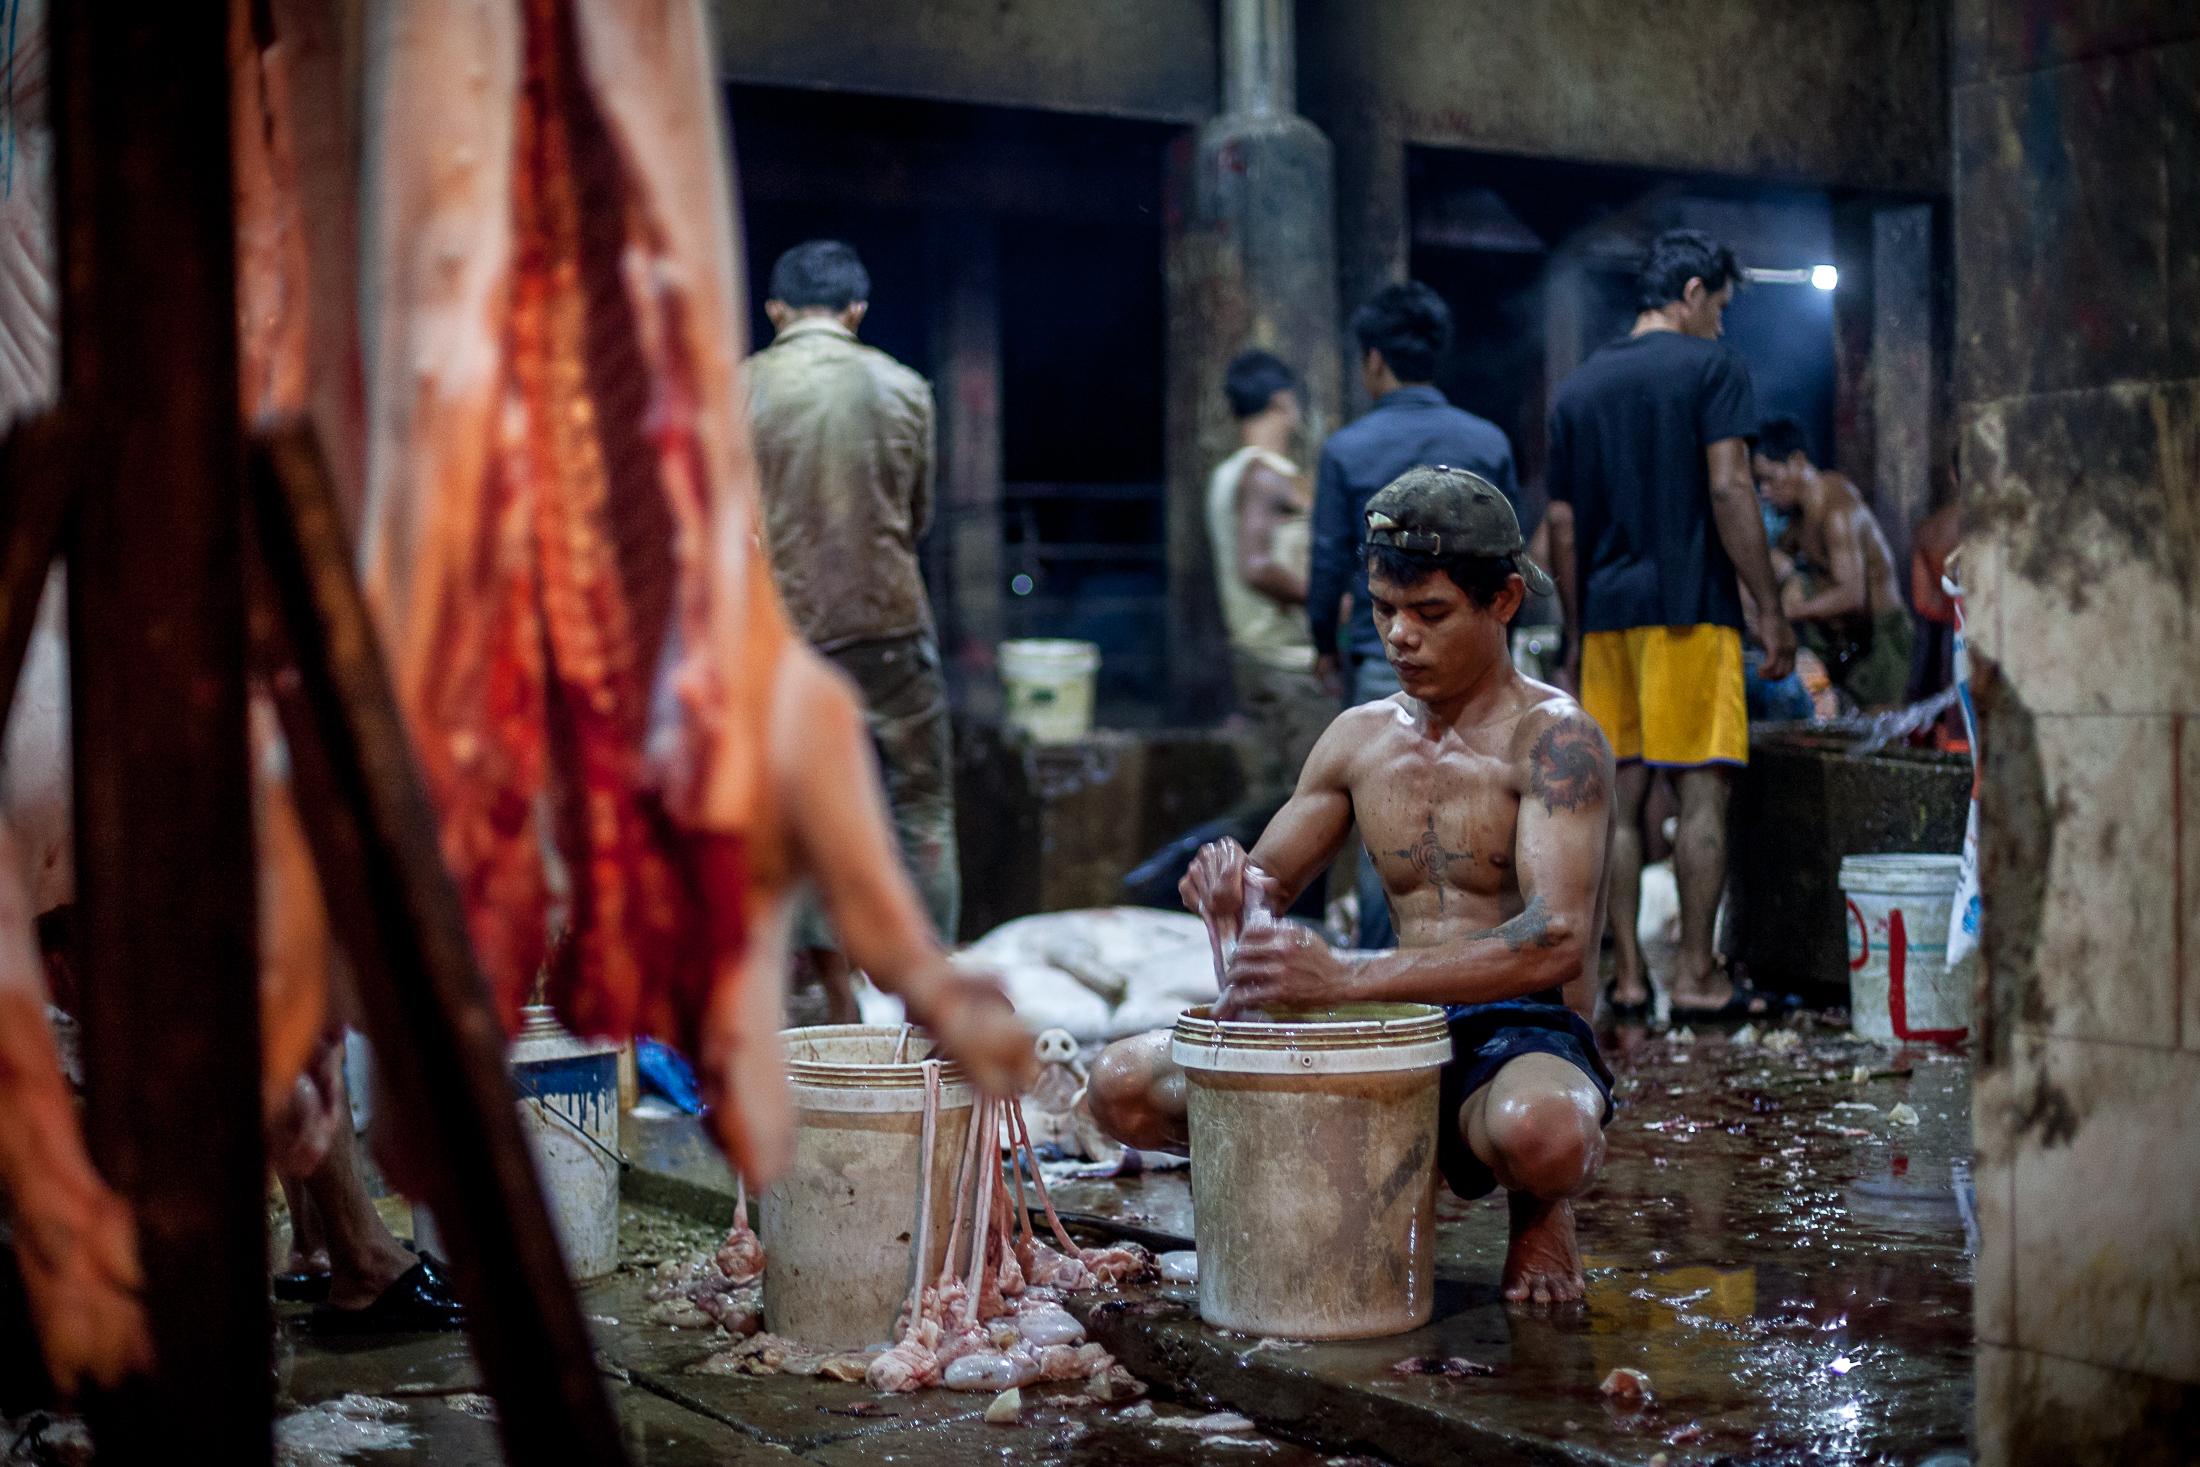 Inside a Cambodian Slaughterhouse - SIEM REAP, CAMBODIA - FEBRUARY 22: A worker cleans the...